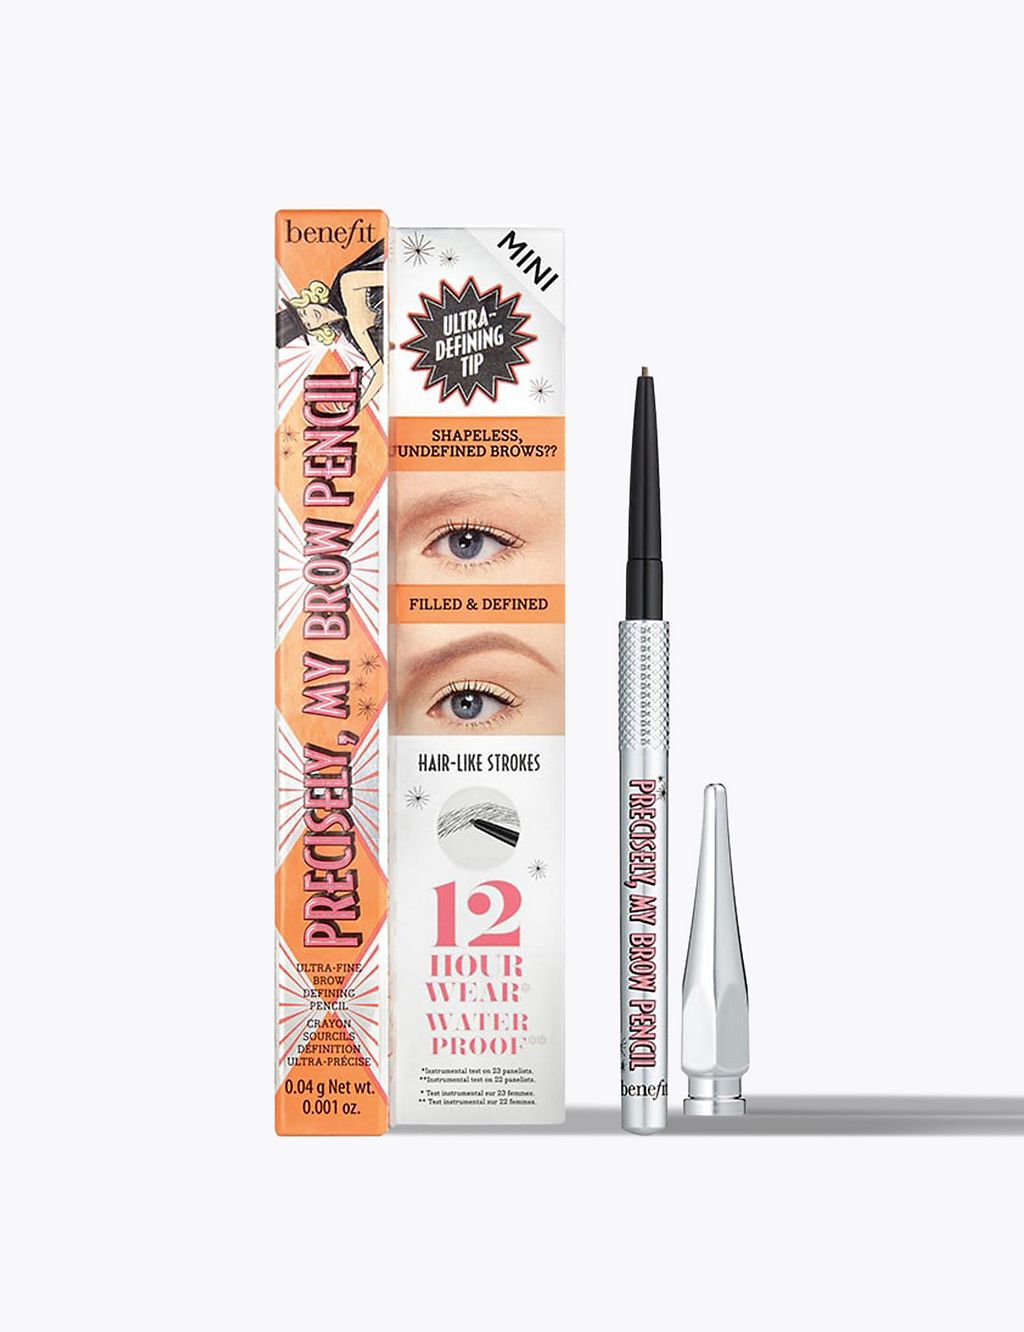 Precisely, My Brow Eyebrow Pencil Mini 0.04g 3 of 7